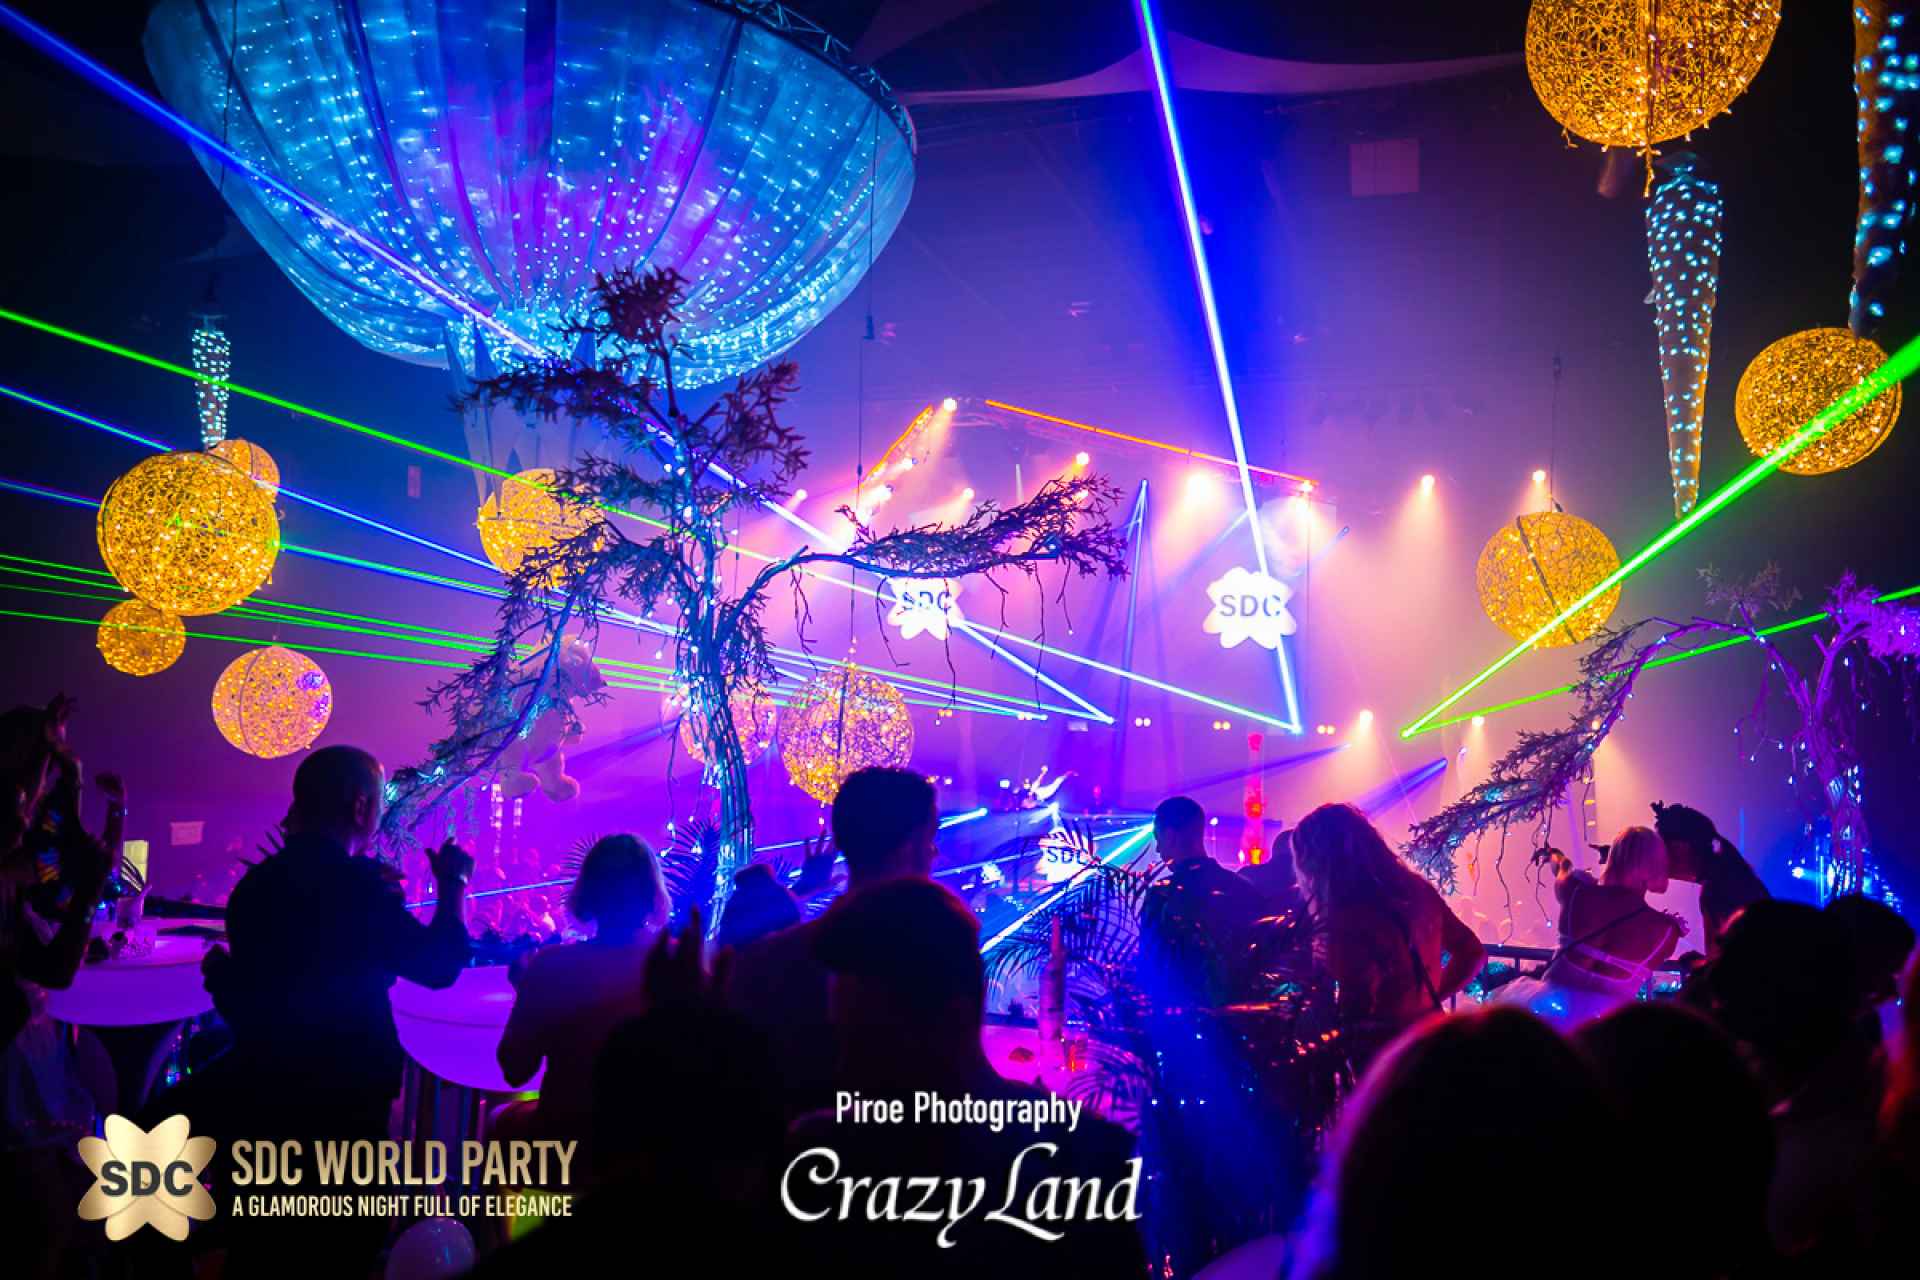 The SDC World Party 2019 pic